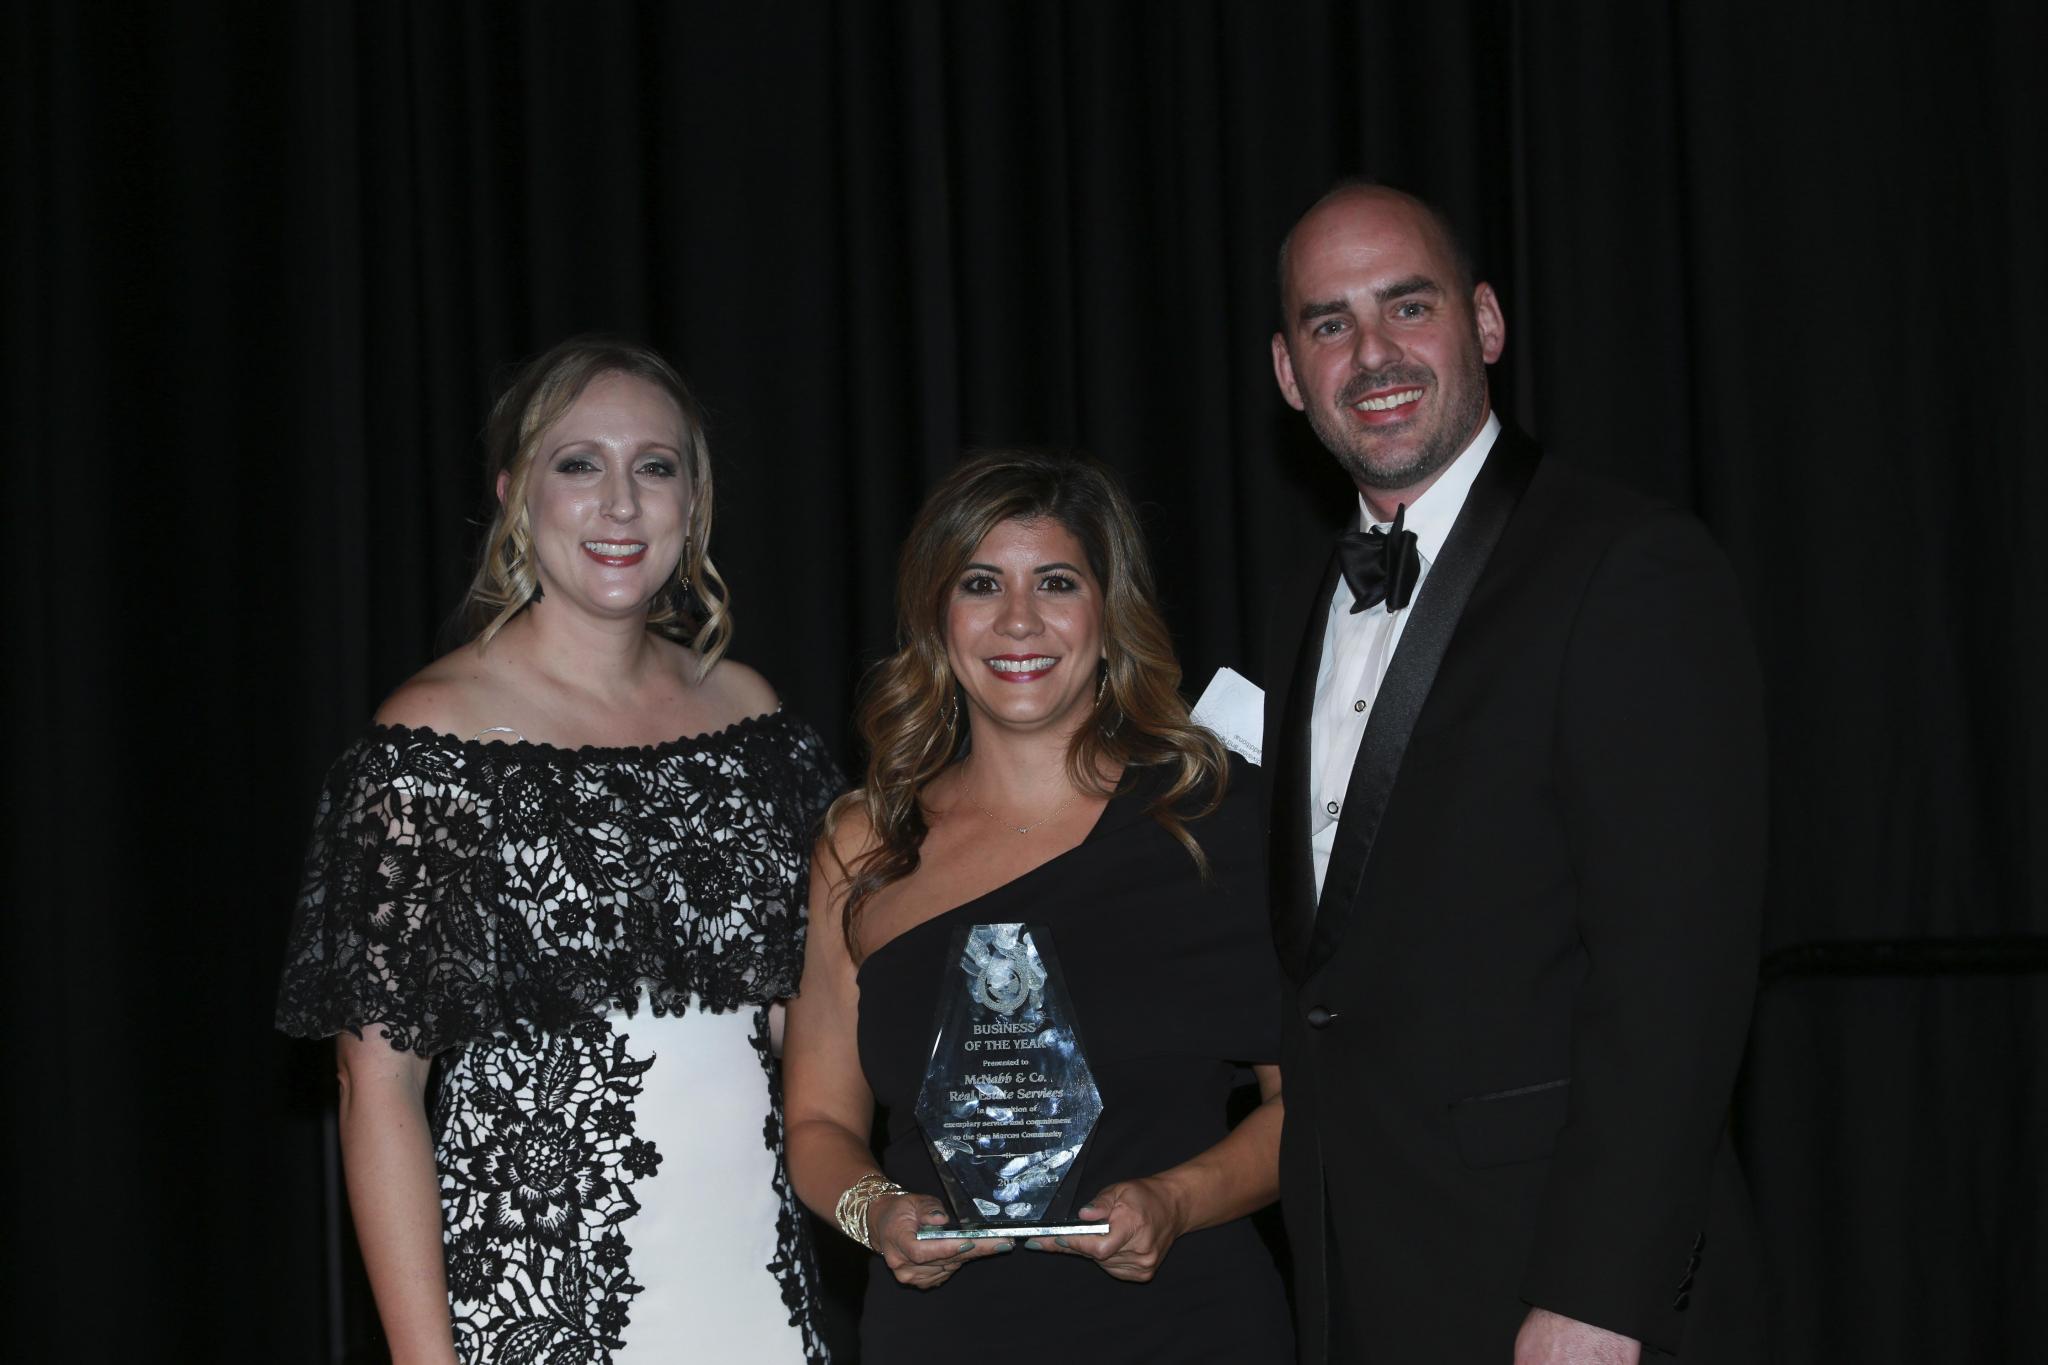 McNabb &amp; Co. Real Estate Services was named Business of the Year.